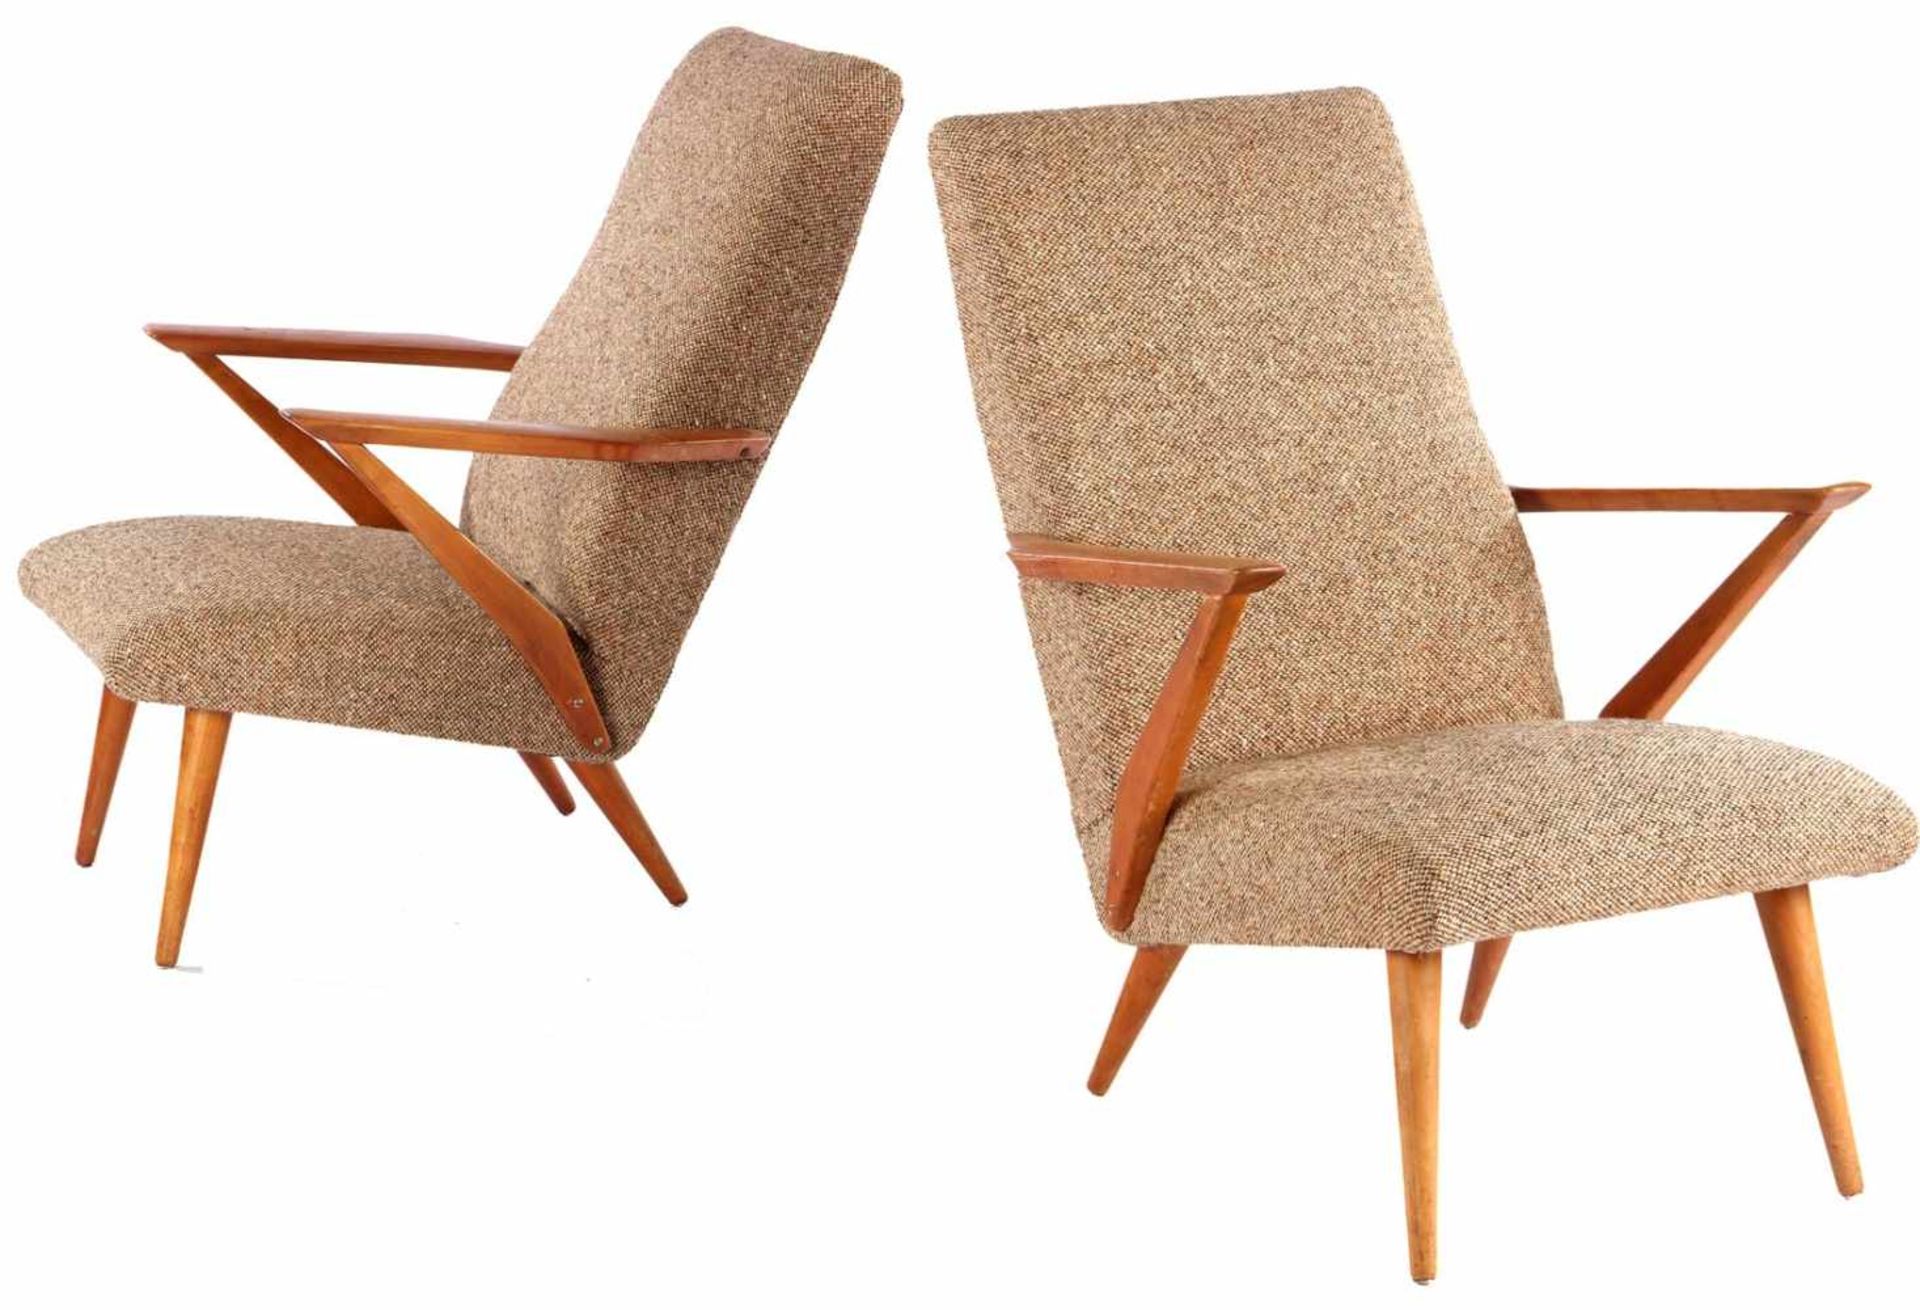 2 1960s armchairs with wool upholstery